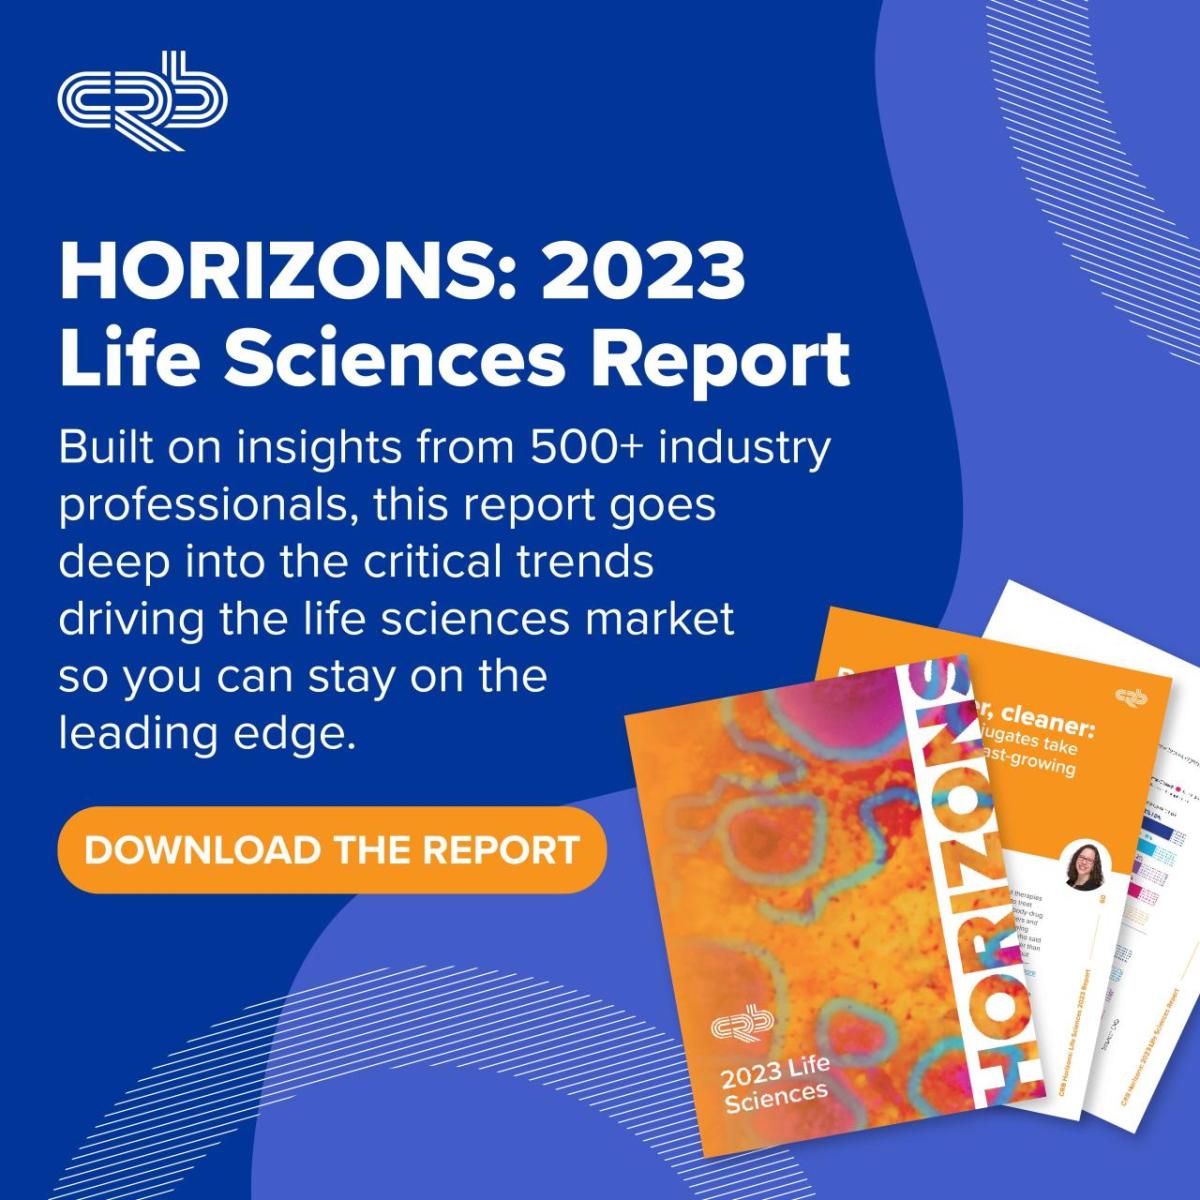 HORIZONS: 2023 Life Sciences Report. CRB logo in the corner